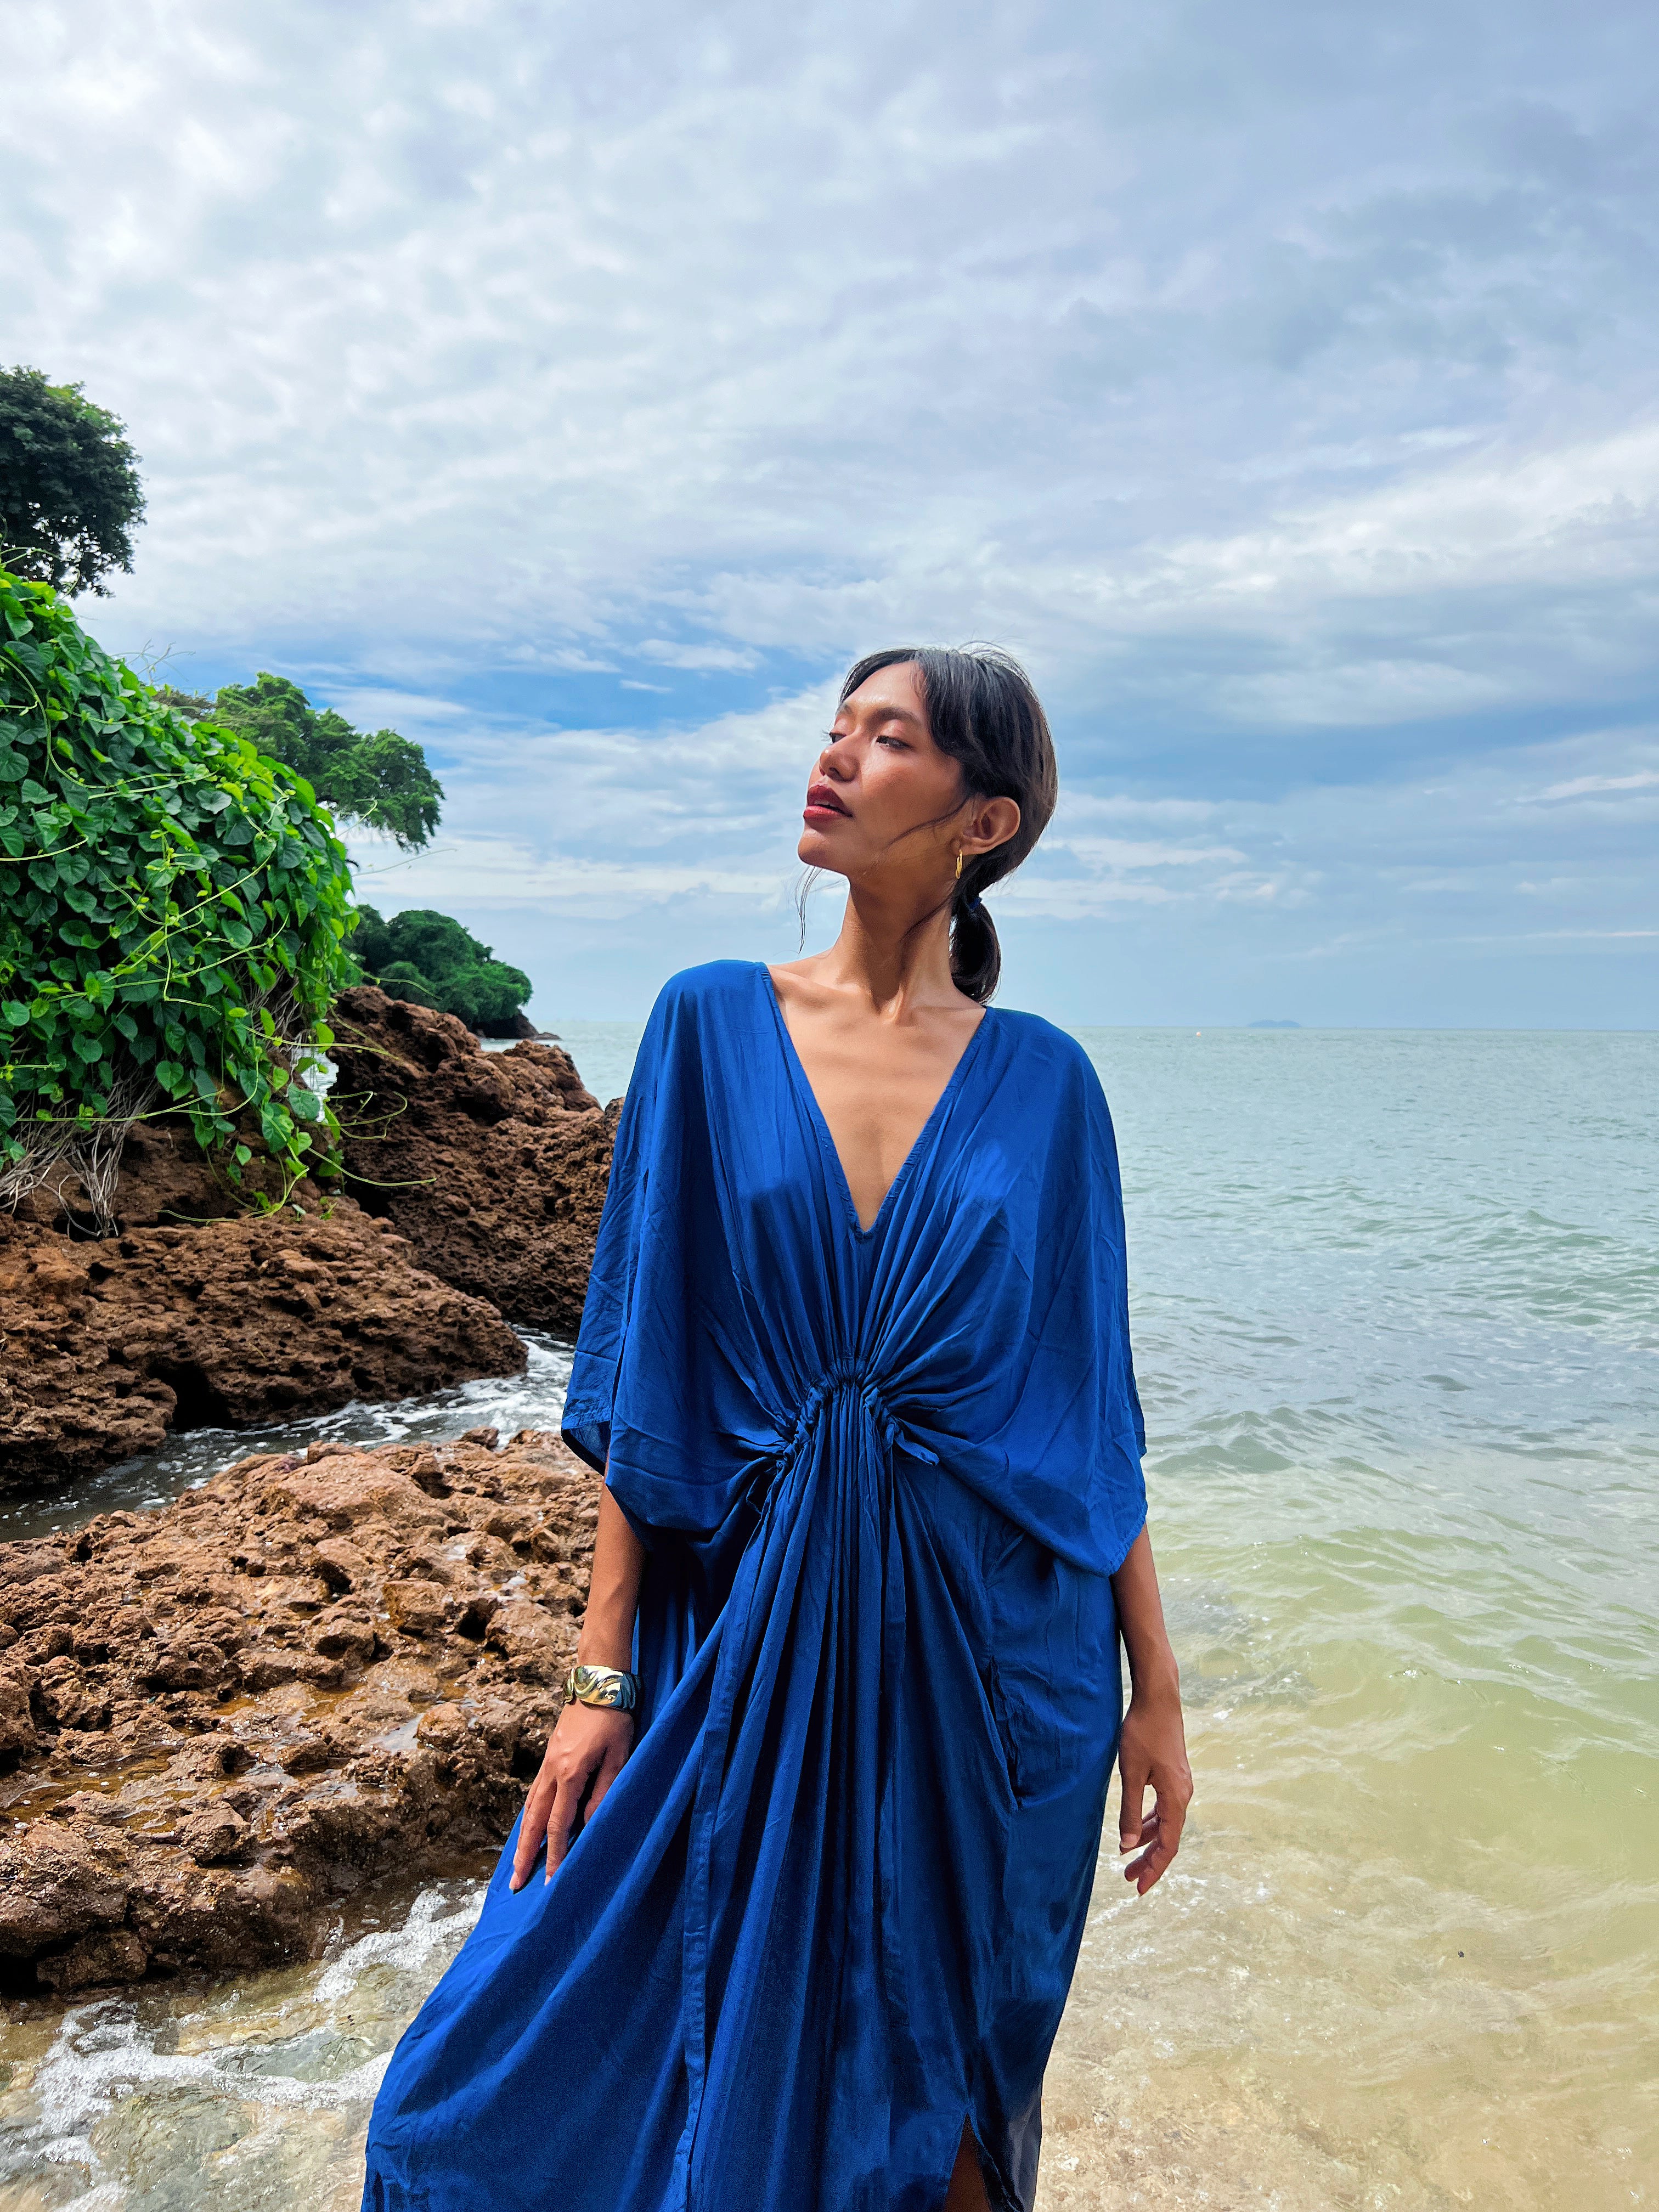 Discover the beauty of our Andaman Kaftan in Royal Blue, a versatile piece designed for your next escape. With inspiration from the vibrant ocean and sky, this oversized kaftan dress brings together elements of comfort, elegance, and timeless style. Whether worn as a maxi dress, beach cover-up, or wrap kimono, it effortlessly adds vacation vibes to any outfit.